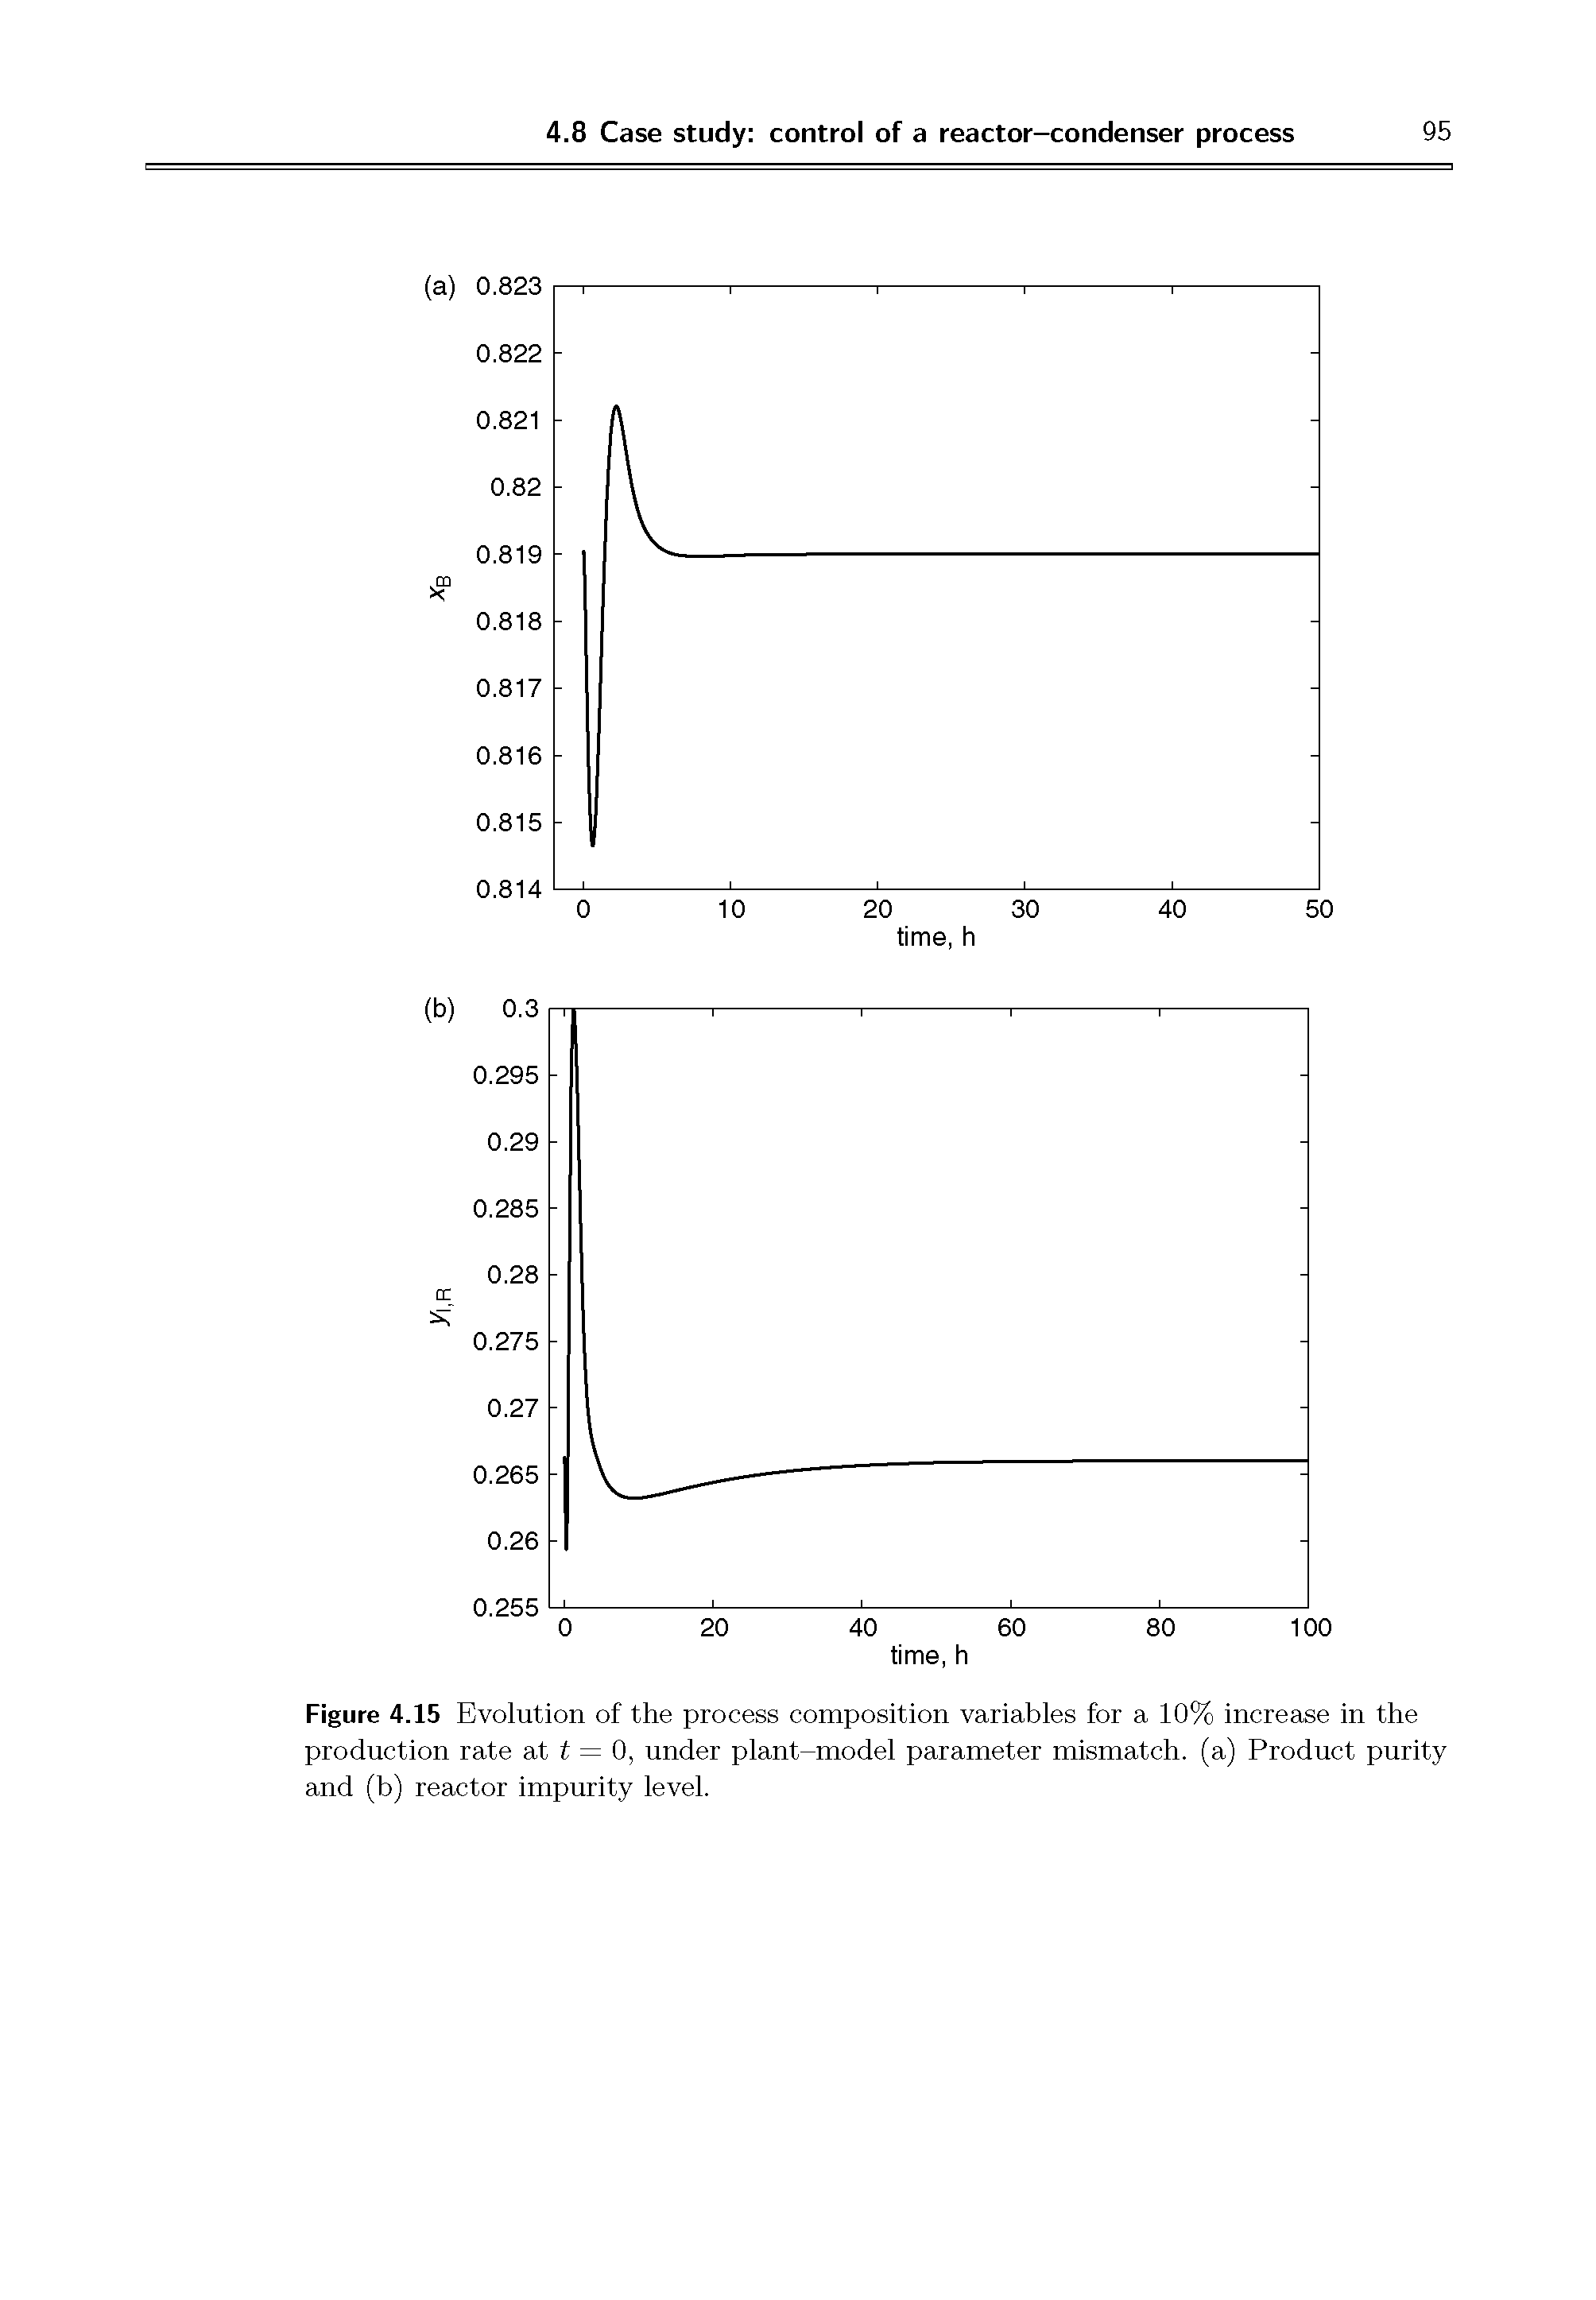 Figure 4.15 Evolution of the process composition variables for a 10% increase in the production rate at t = 0, under plant-model parameter mismatch, (a) Product purity and (b) reactor impurity level.